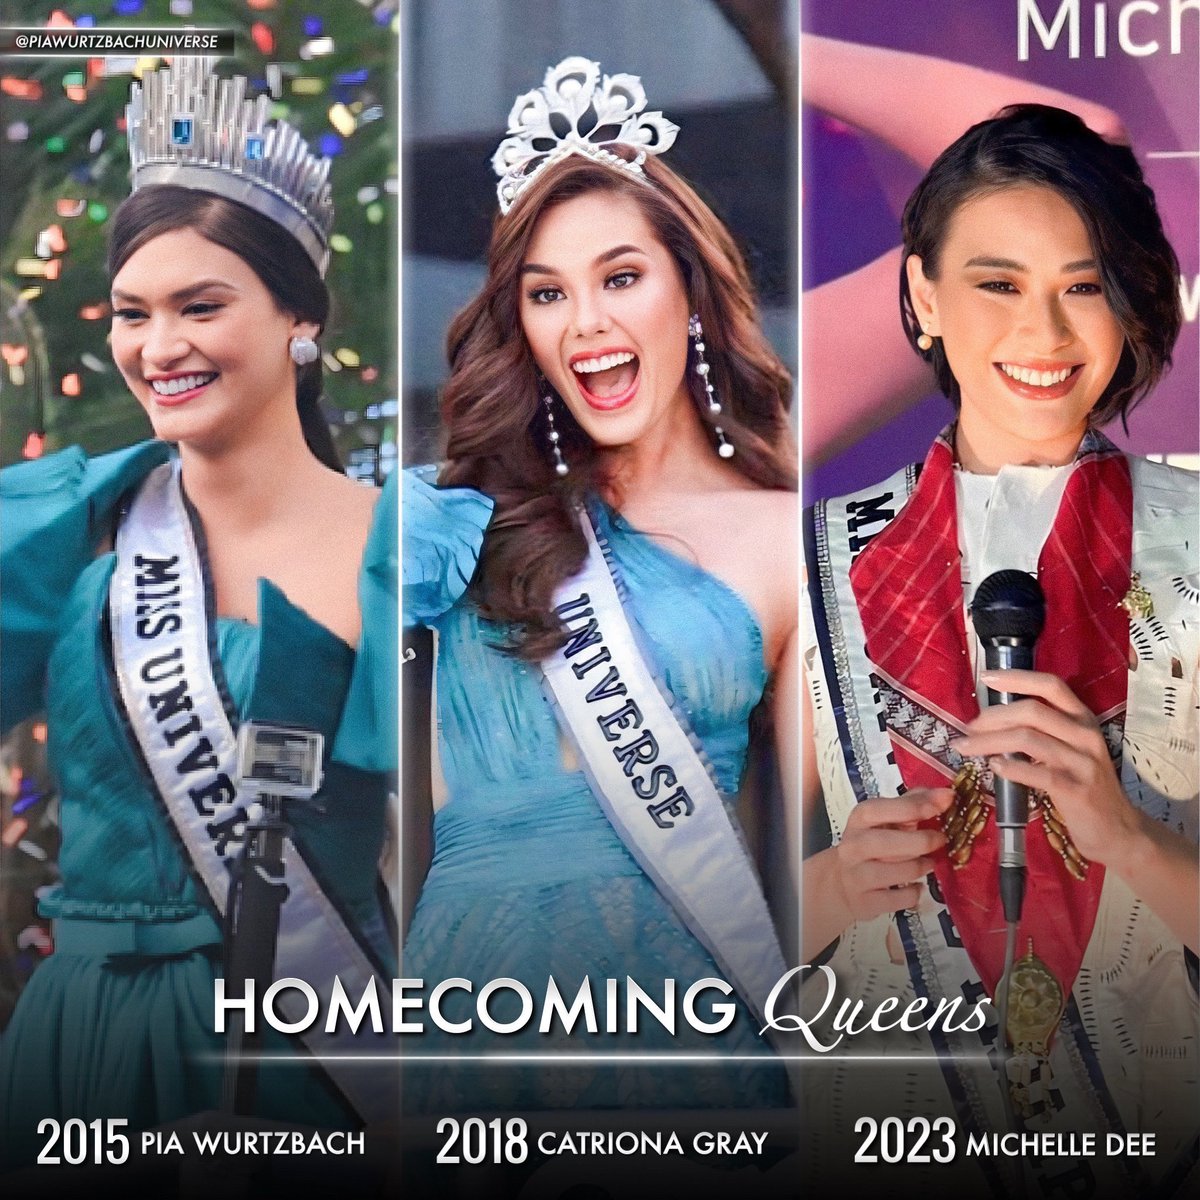 Queens worth celebrating 🙌🏻 @michellemdee may not have clinched the crown, but with what she’s shown to the Universe, that’s enough to give her the recognition she deserves! 💙 Mabuhay, #Filipinas!

#MichelleDee #PiaWurtzbach #CatrionaGray #MissUniverse #MissUniverse2023 #PorDee